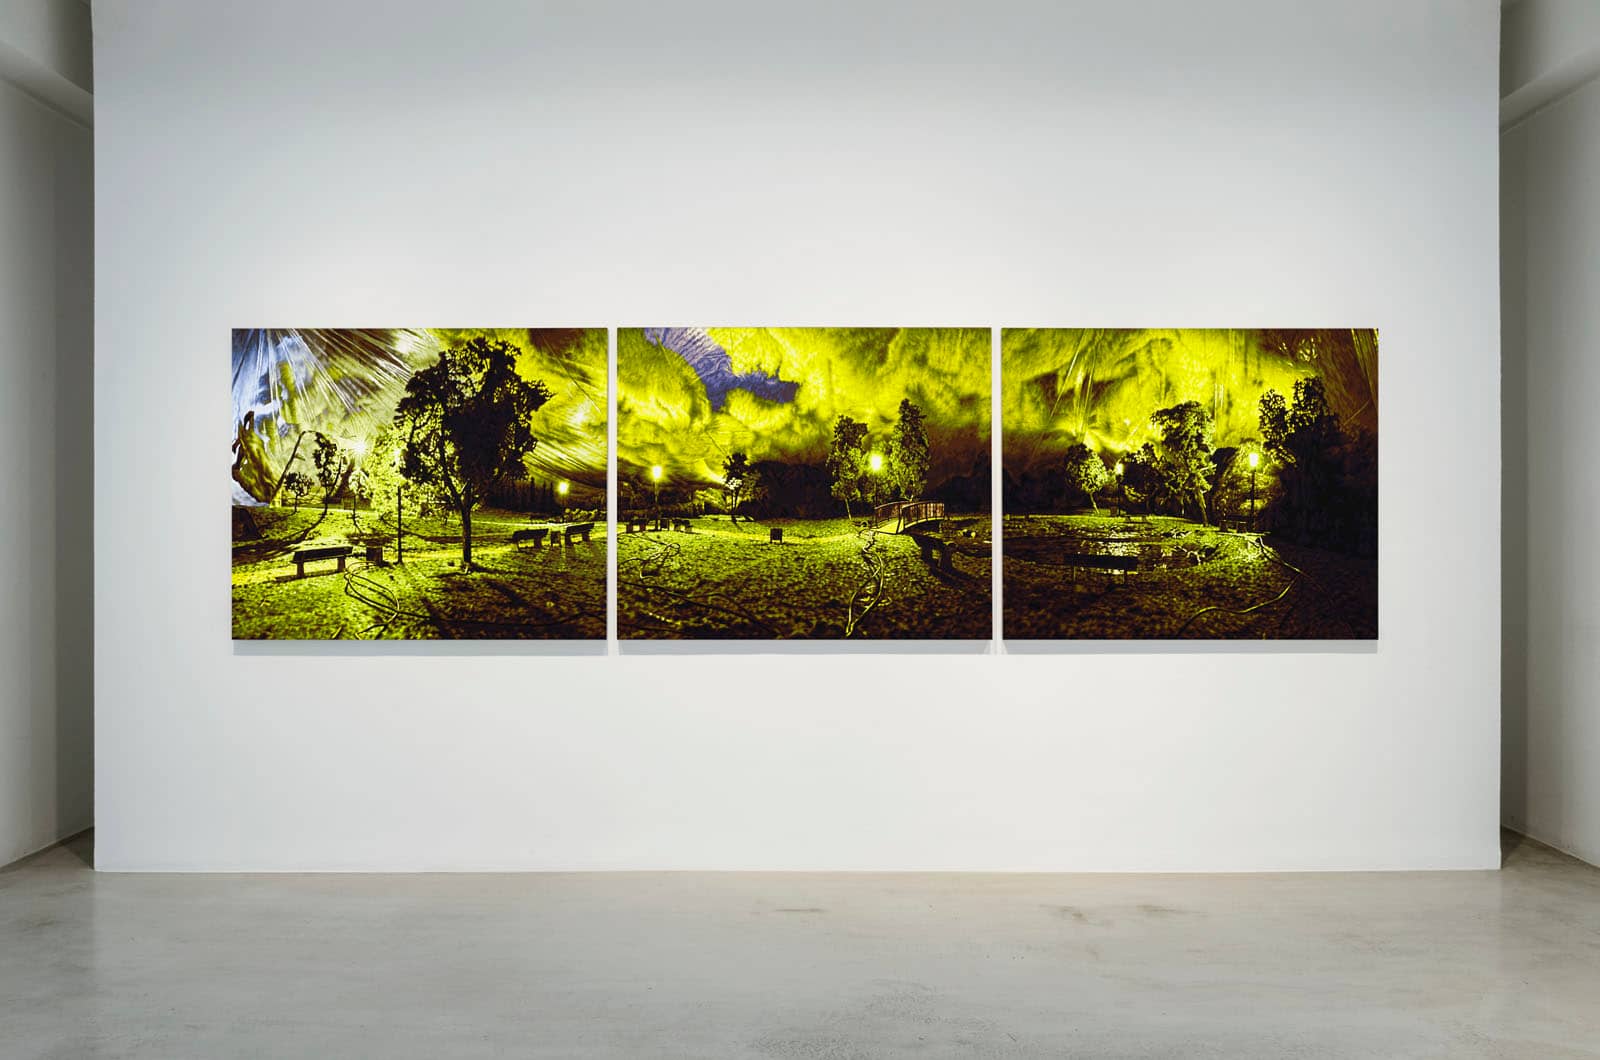 Exhibition view from the solo show "Remote Viewing" by Philipp Fröhlich at Soledad Lorenzo gallery in Madrid, Spain, 2012. The photo shows a triptych painting in tempera on canvas hanging in one of the gallery spaces.